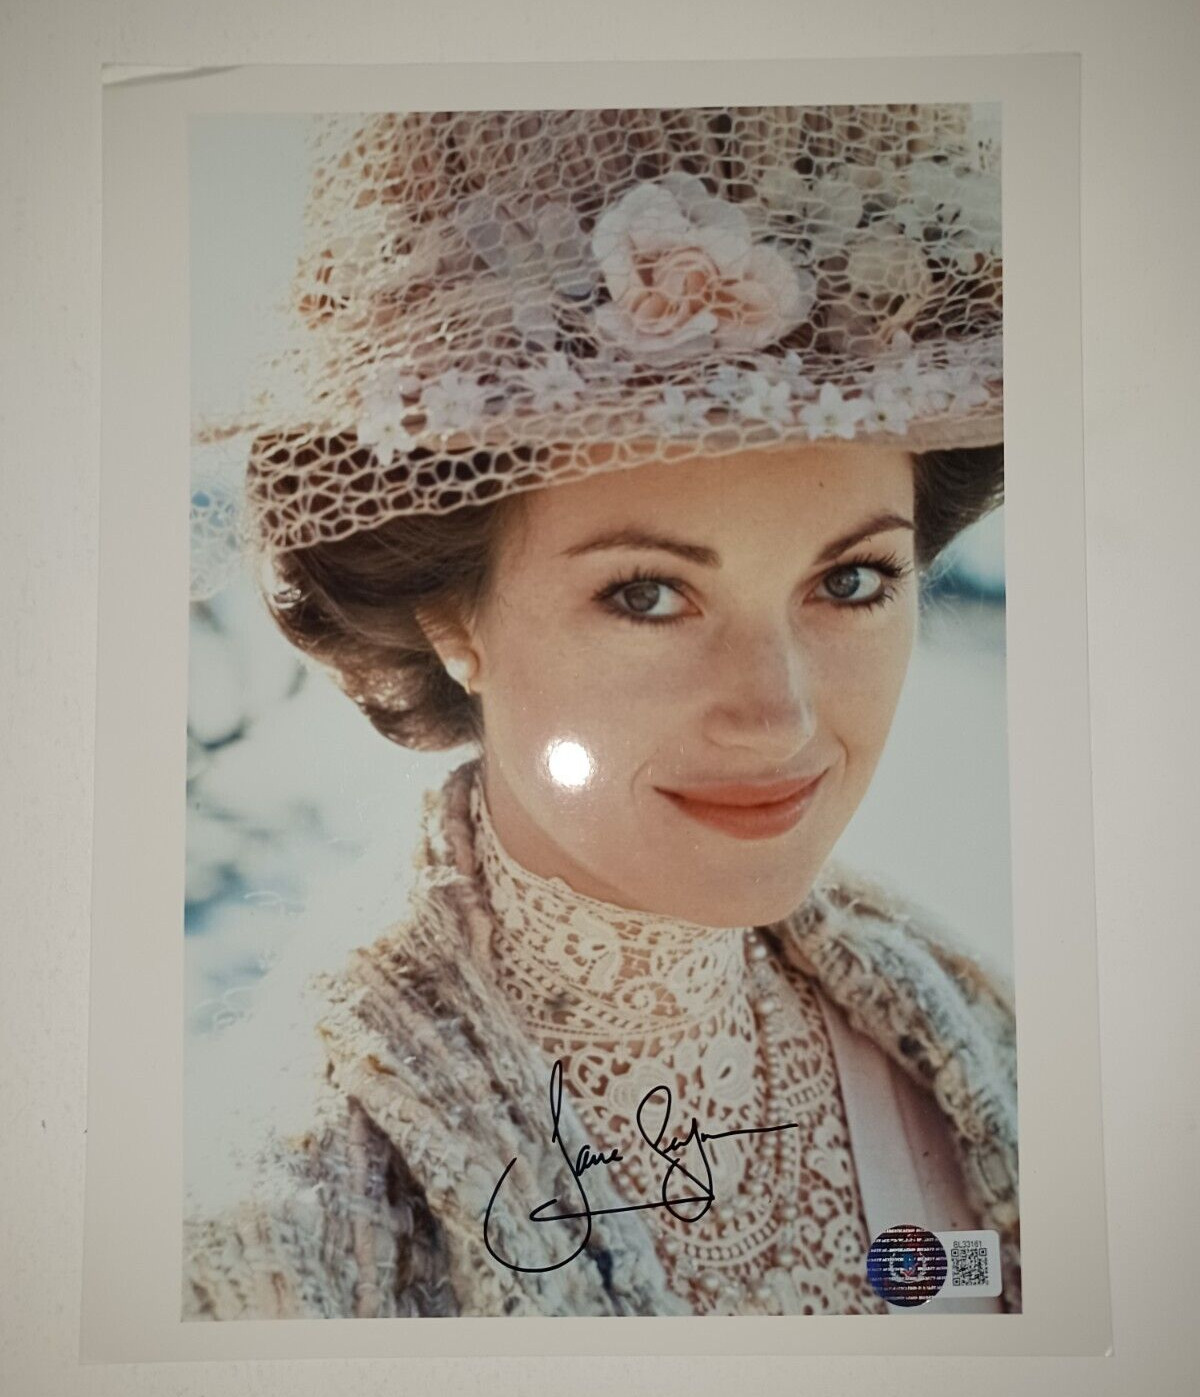 Jane Seymour Somewhere in Time Signed Autographed 8x10 photo Beckett BAS